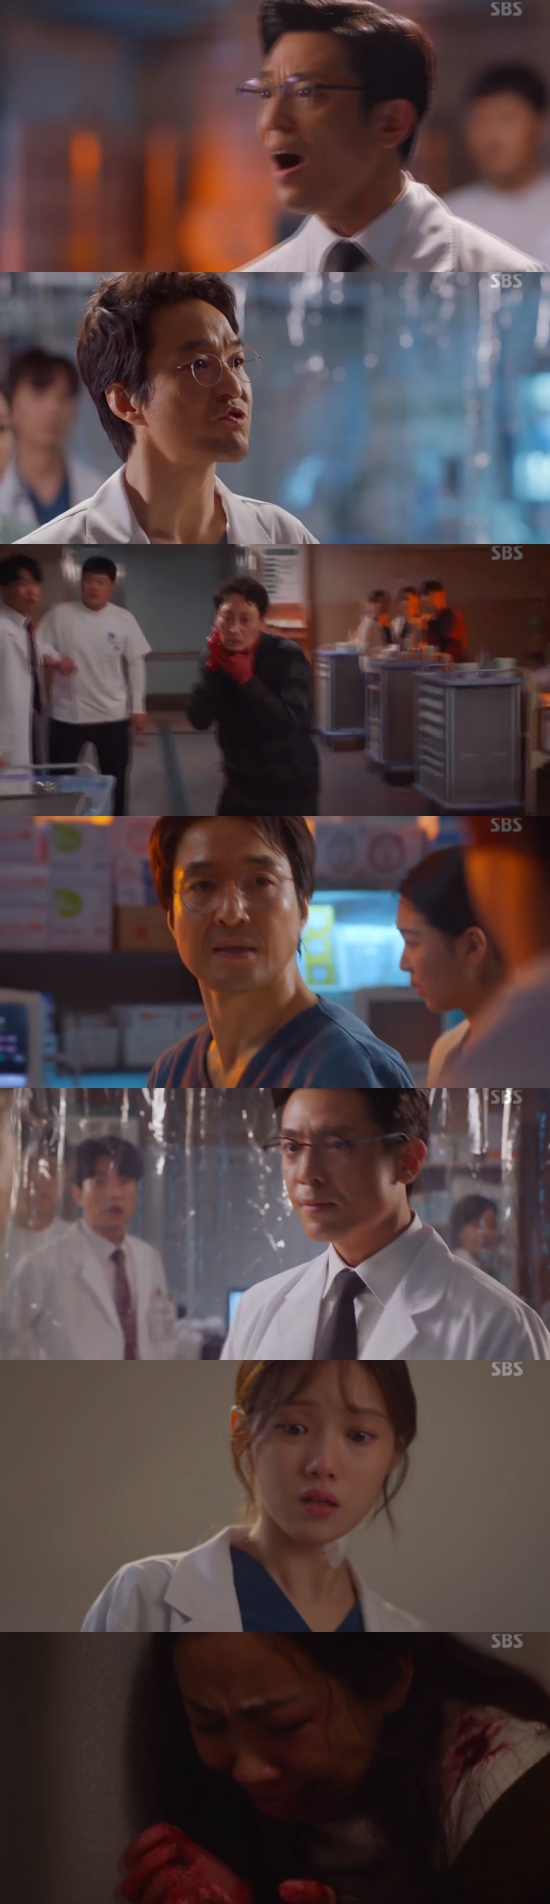 Romantic Doctor Kim Sa-bu 2 Lee Sung-kyung was informed of the fire.In the 7th episode of SBS monthly drama Romantic Doctor Kim Sabu 2 broadcasted on the 27th, Cha Eun-jae (Lee Sung-kyung) was depicted in crisis to be fired.On this day, Cha Eun-jae was aware that a migrant woman, a patient guardian, was subjected to domestic violence from her husband.Cha Eun-jae was accompanied by her husband and Sibi who used domestic violence, and the migrant woman wielded a cutter knife at her husband.Cha Eun-jae was cut by a knife to prevent the accident, and Seo Woo-jin rushed Cha Eun-jae to the emergency room. Fortunately, Cha Eun-jae regained consciousness and Seo Woo-jin sealed the wound.However, CCTV footage of the hospital showed Cha Eun-jae appearing to be playing Sibi first, Cha Eun-jae decided to apologize, and Kim Sa-bu (Han Seok-gyu) dissuaded Cha Eun-jae.Cha Eun-jae said, It is more uncomfortable for me to be embarrassed by the hospital because of that one. Kim said, It is uncomfortable. I kneel down and bow down because I am uncomfortable.You pretend to be lethargic, youre dirty, you lose. You get all that easy, and you end up living a cheap life, no matter what youre treated. You understand?He said, I am a man.In particular, Kim Ju-Hun planned to fire Cha Eun-jae.In addition, Park Min-guk poured out a word because Cha Eun-jae was a woman, and Yang Ho-joon (Ko Sang-ho) told Cha Eun-jae to quit the hospital within a month.Cha Eun-jae recalled what Kim Sa-bu said and realized, At that moment, I was a cheap life even if I was treated like that. Cha Eun-jae finally went to the bathroom alone.Kim Sabu and Park Min-guk also fought for weapons injured in prison.Park Min-guk said, It is an arms weapon that killed two people. He said he could not receive a patient, and Kim said, It is a shock to excessive bleeding.Park Min-guk said, I want to lead this hospital to be safer and more stable. Kim said, Who says that picking patients leads the hospital to be safe and stable.I do not think its right. When I was attacked by a fellow, I did not take any action. At this time, the husband of the migrant woman appeared with a knife to the neck, and fell down saying, Please save me. Kim said, Smartly watch. Domestic violence is not accidental.Cha was hurt trying to stop it somehow, and you were the head of this hospital, and you were covered up even though you should have stopped the vicious cycle.Principle? Thats funny. Youre trying to keep yourself alive because youre going to be shitting your body. Kim immediately ordered the patient to move to the hybrid, and he said, Do you have an objection?At the same time, Cha Eun-jae found a migrant woman hiding in the bathroom, and the migrant woman shed tears with a bloody cutter knife.Photo = SBS Broadcasting Screen